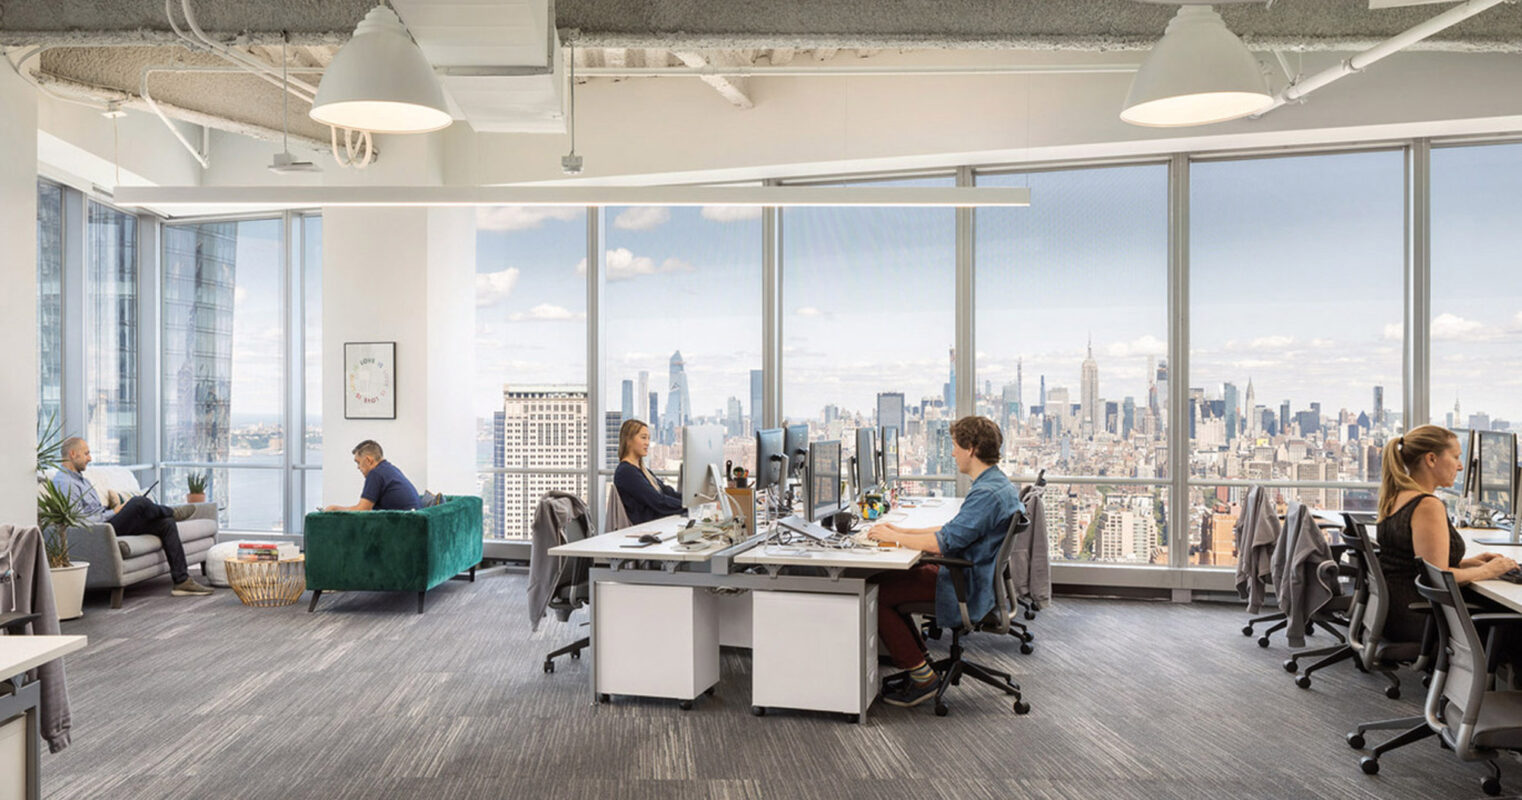 Open-plan office space with full-height windows offering a panoramic cityscape. Exposed concrete ceiling and pendant lighting complement the modern aesthetic, interspersed with ergonomic workstations and informal seating areas for collaborative work. Natural light floods the space, creating a vibrant and productive environment.